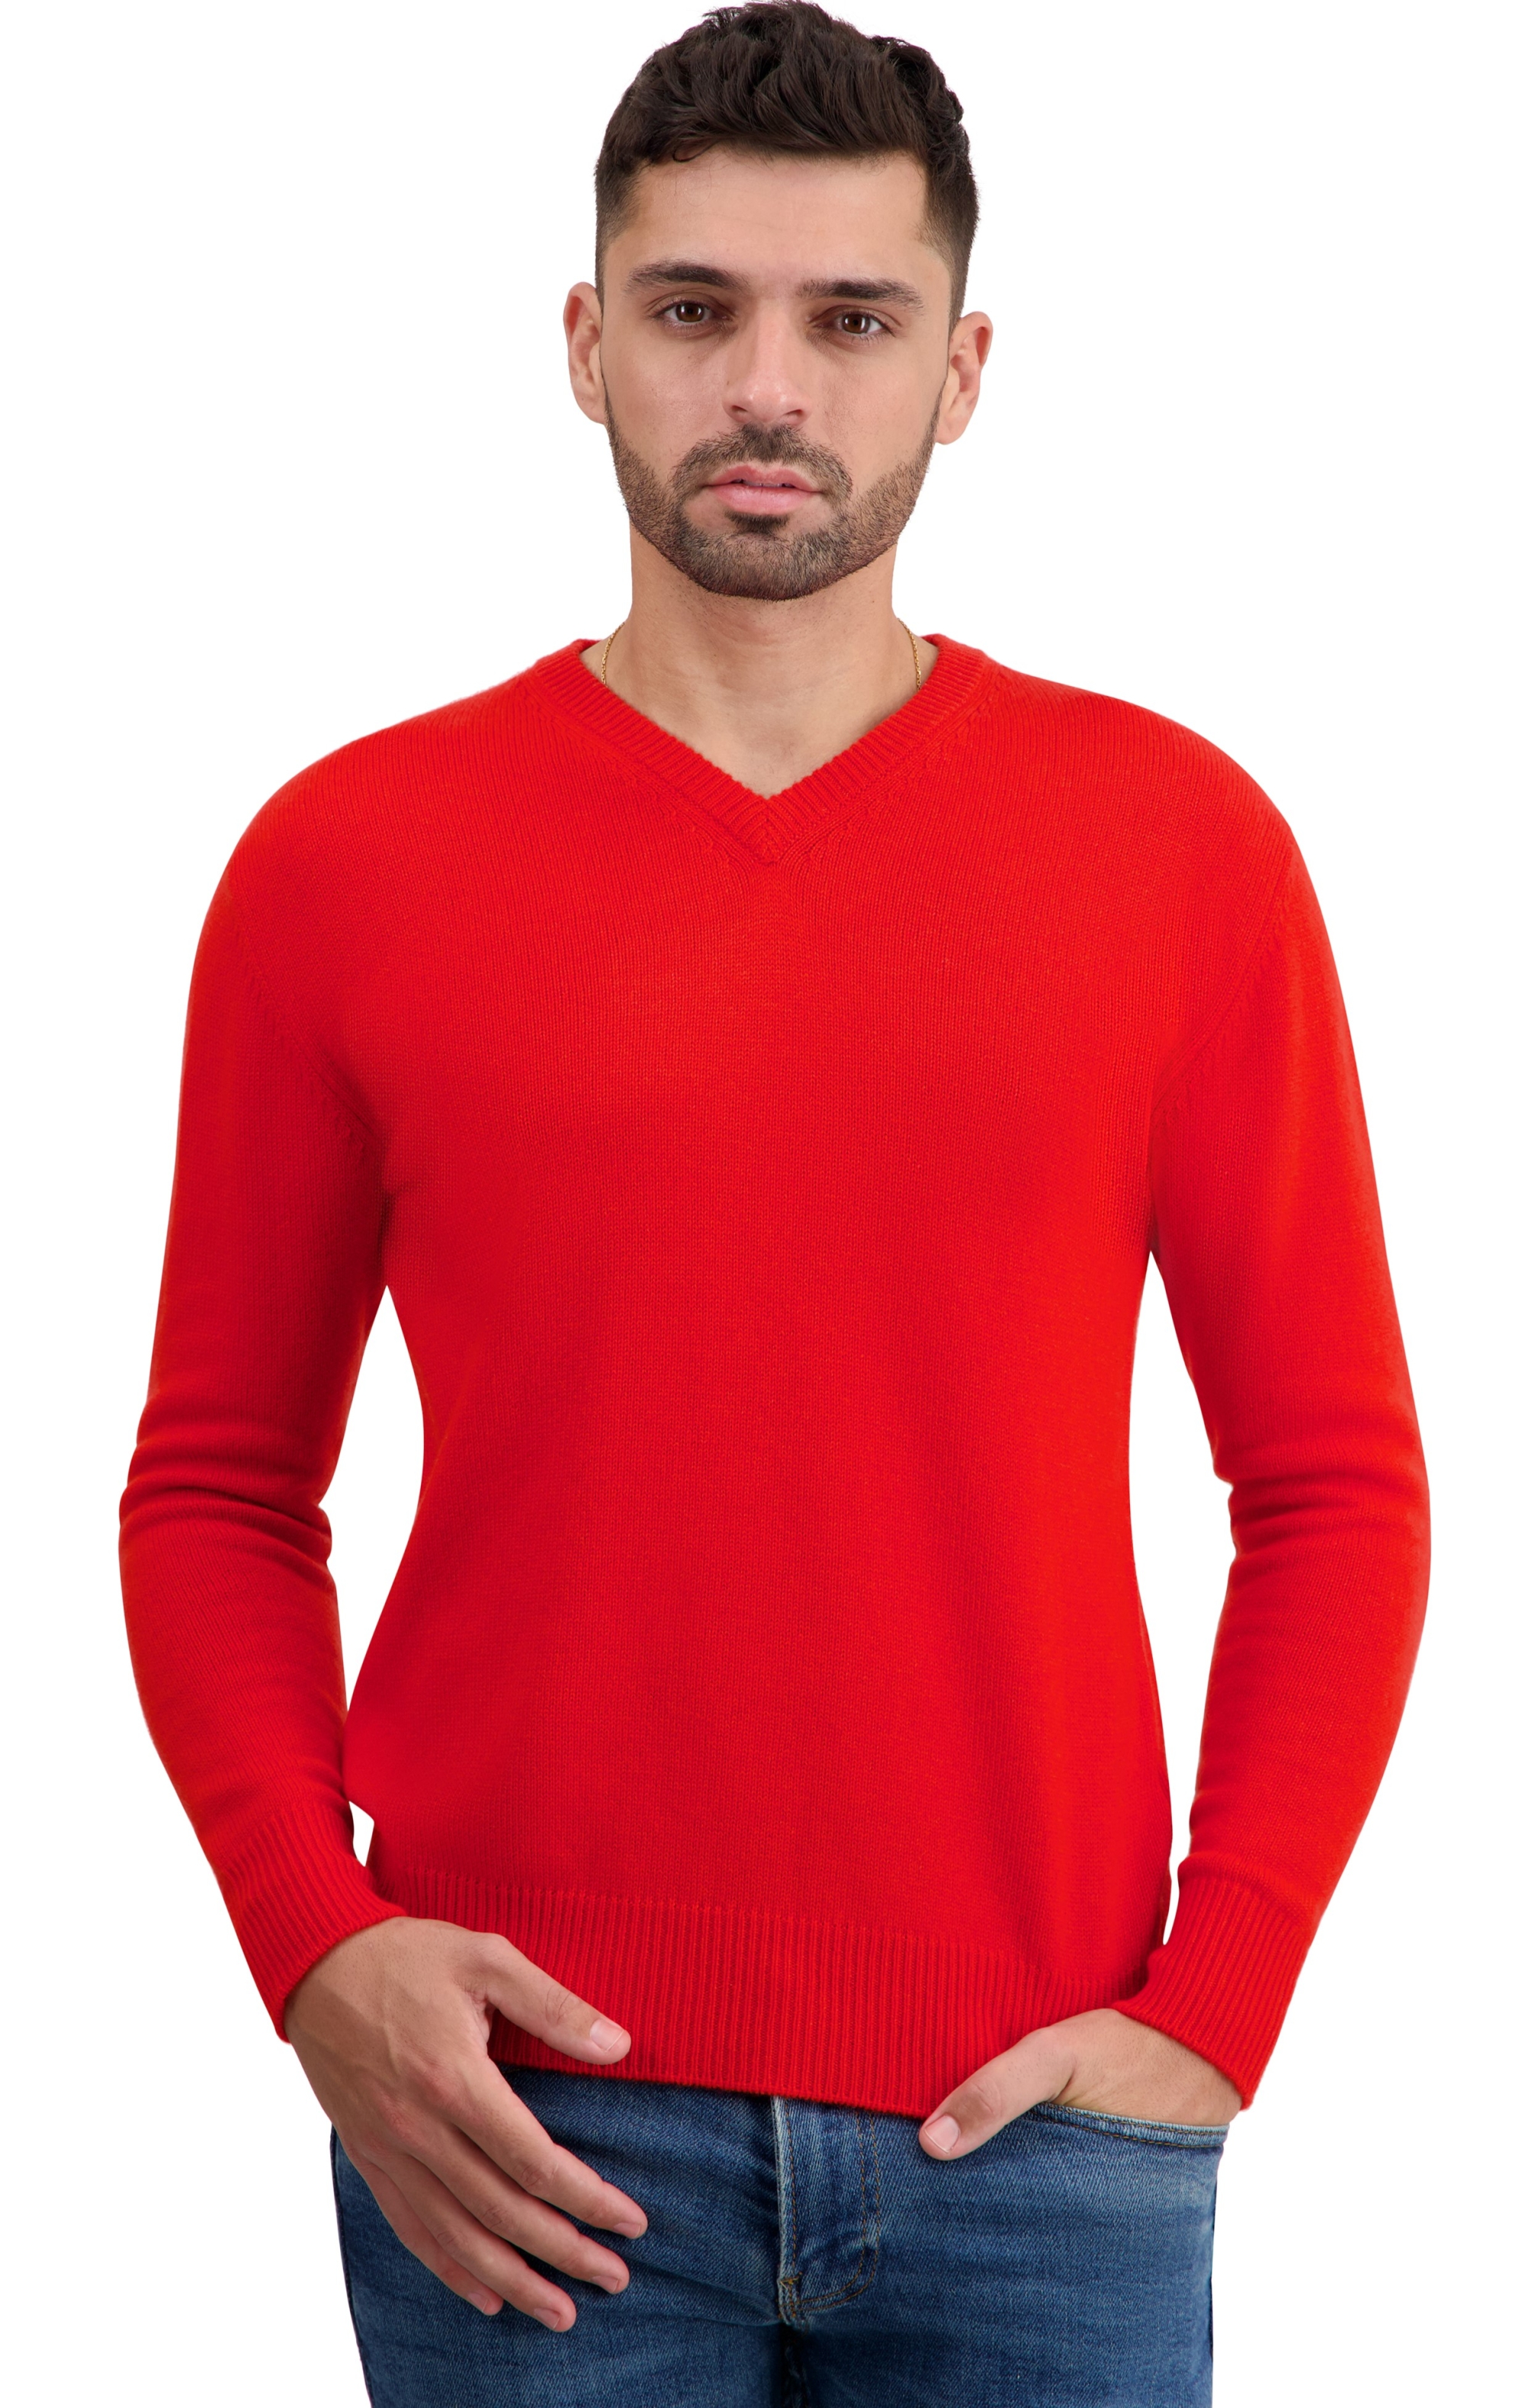 Cashmere men basic sweaters at low prices tour first tomato m